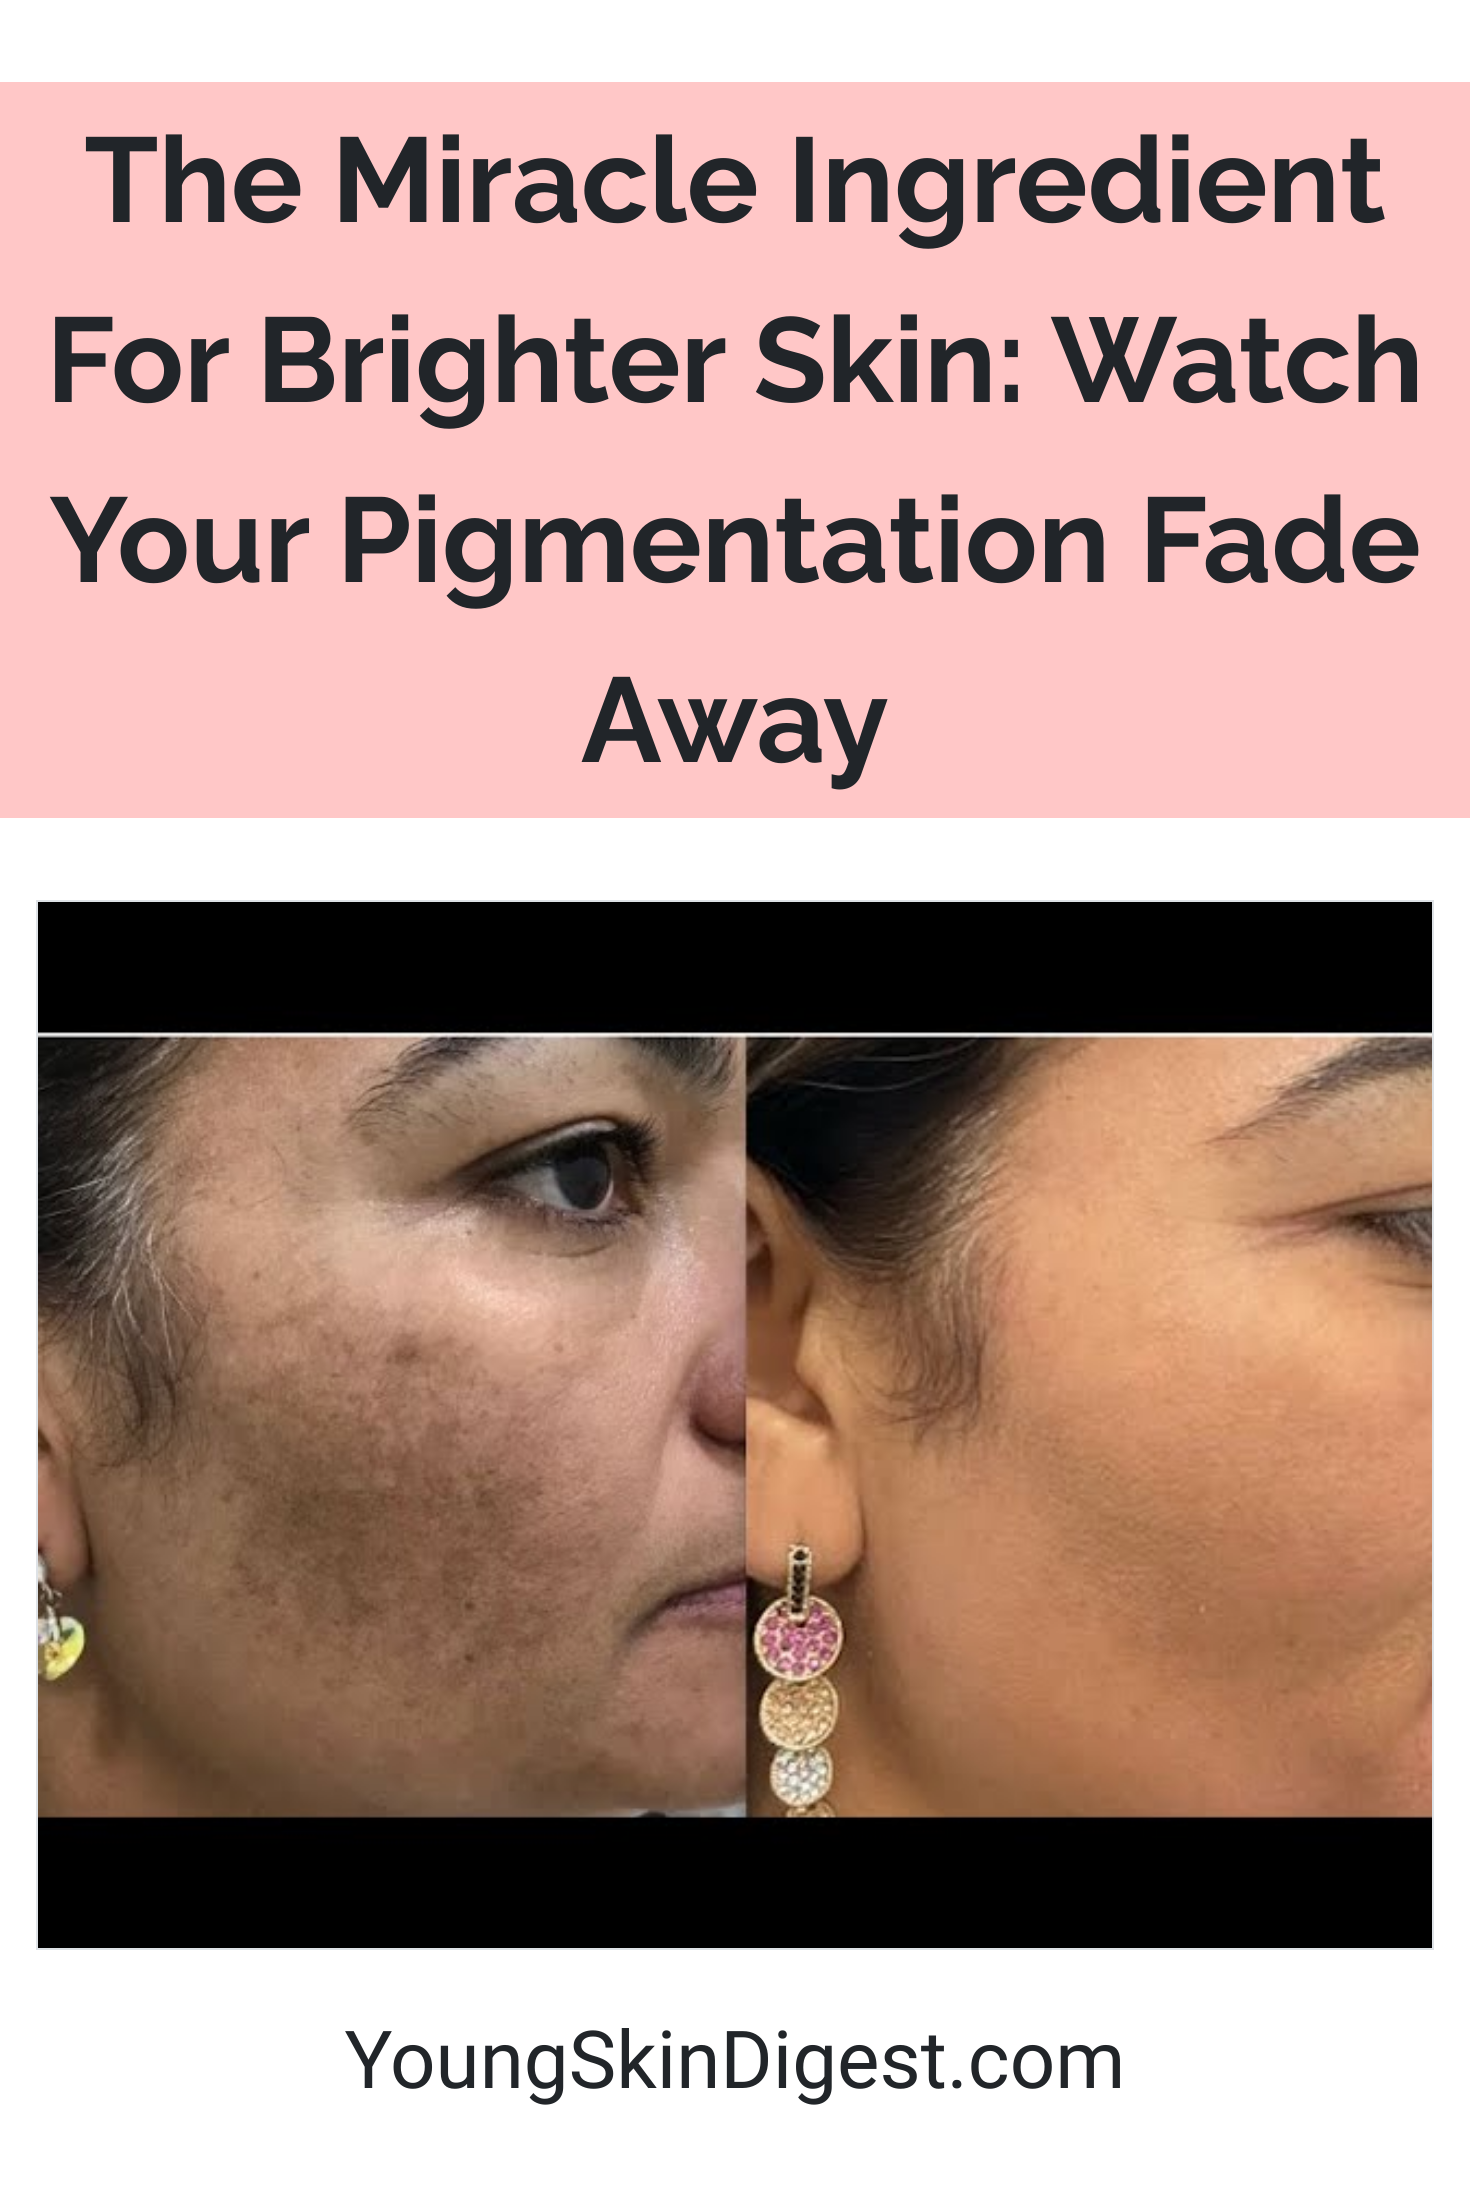 The Miracle Ingredient For Brighter Skin Watch Your Pigmentation Fade